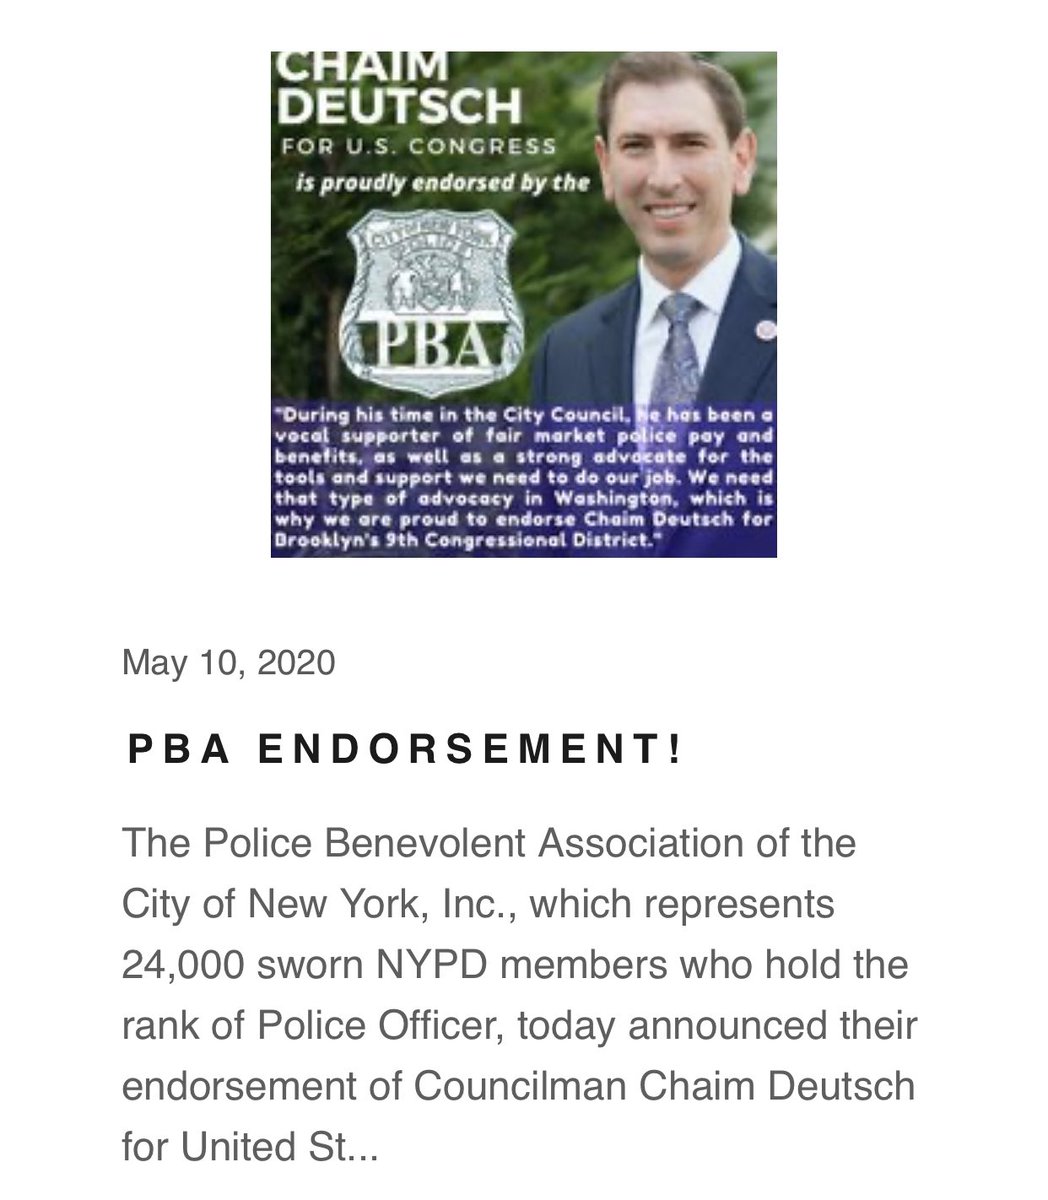 Yup... BK Councilman Chaim Deutsch, who seems to be the defacto leader here, is endorsed by miltiple law enforcement and union groups plus RT’s Trump supporters, so, yeah, def some coordinated bs around this. https://twitter.com/nyscanner/status/1275278080580489217?s=21  https://twitter.com/nyscanner/status/1275278080580489217